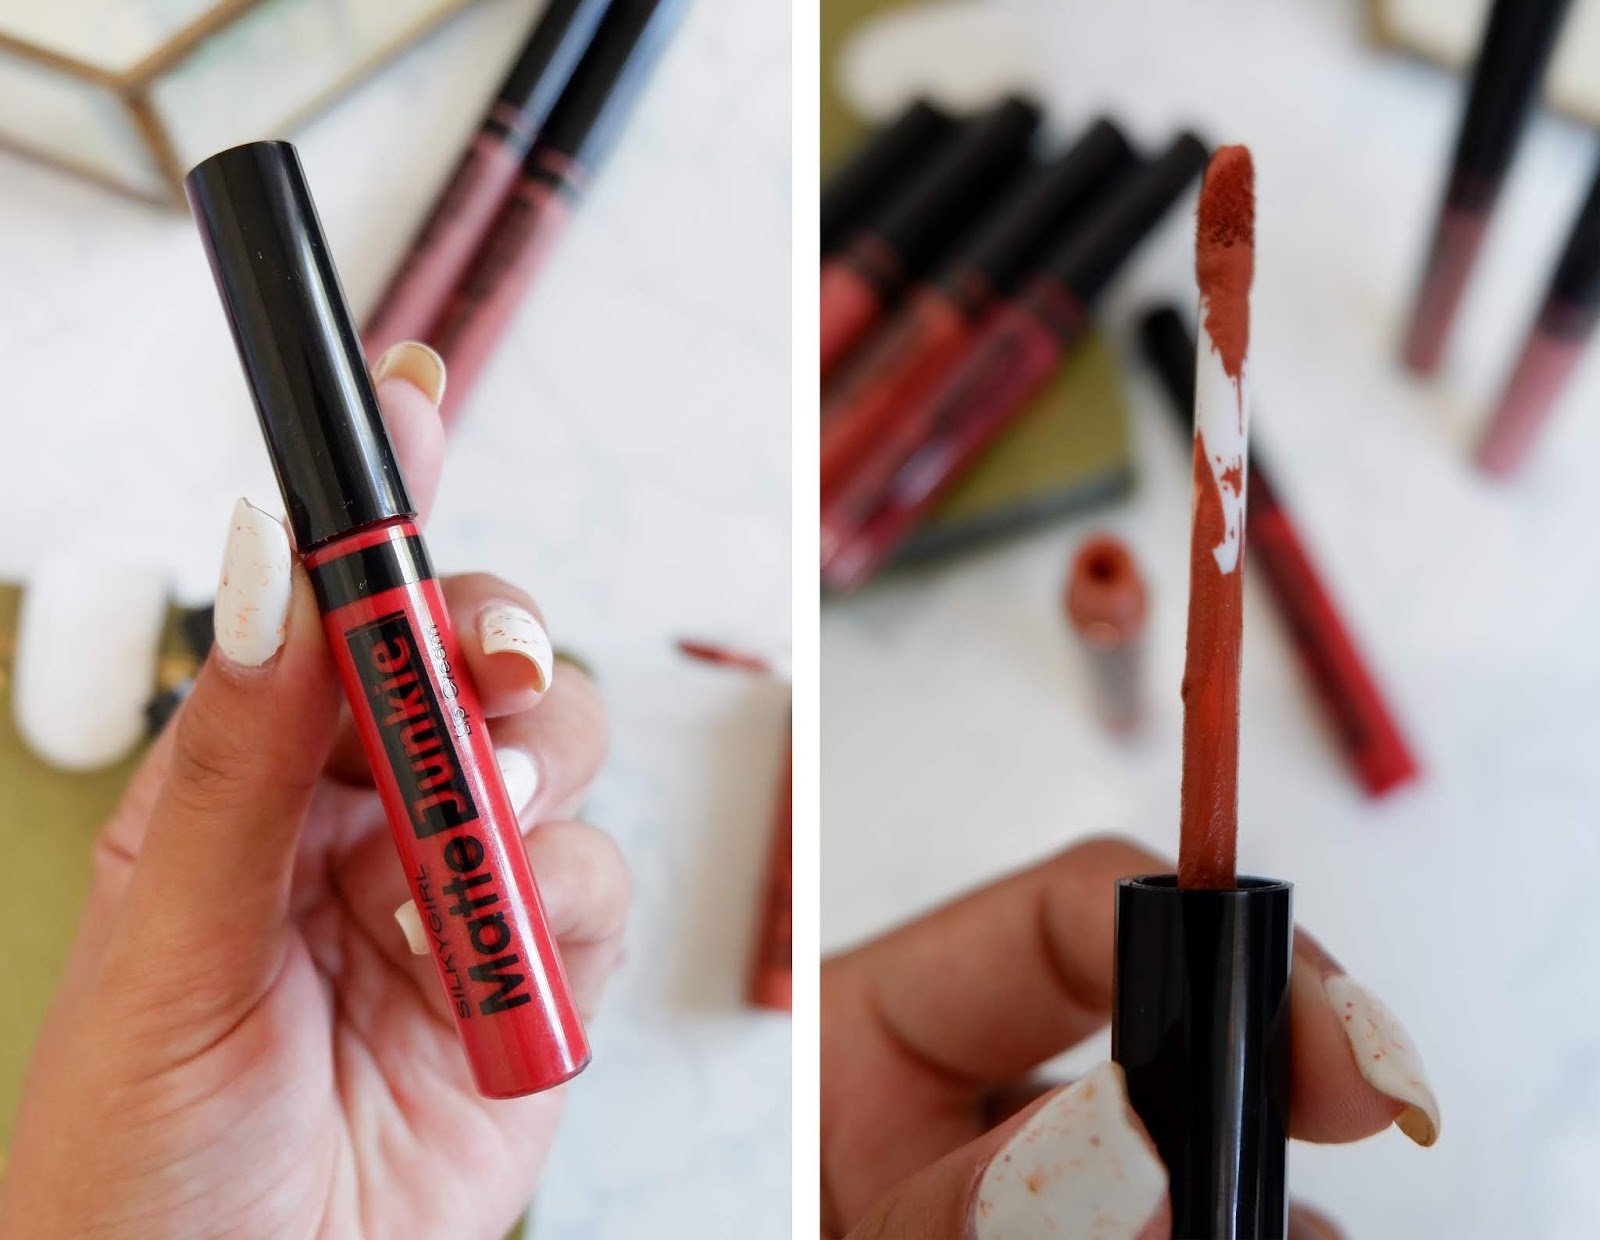 SILKYGIRL: MATTE JUNKIE LIP CREAM REVIEW AND SWATCHES